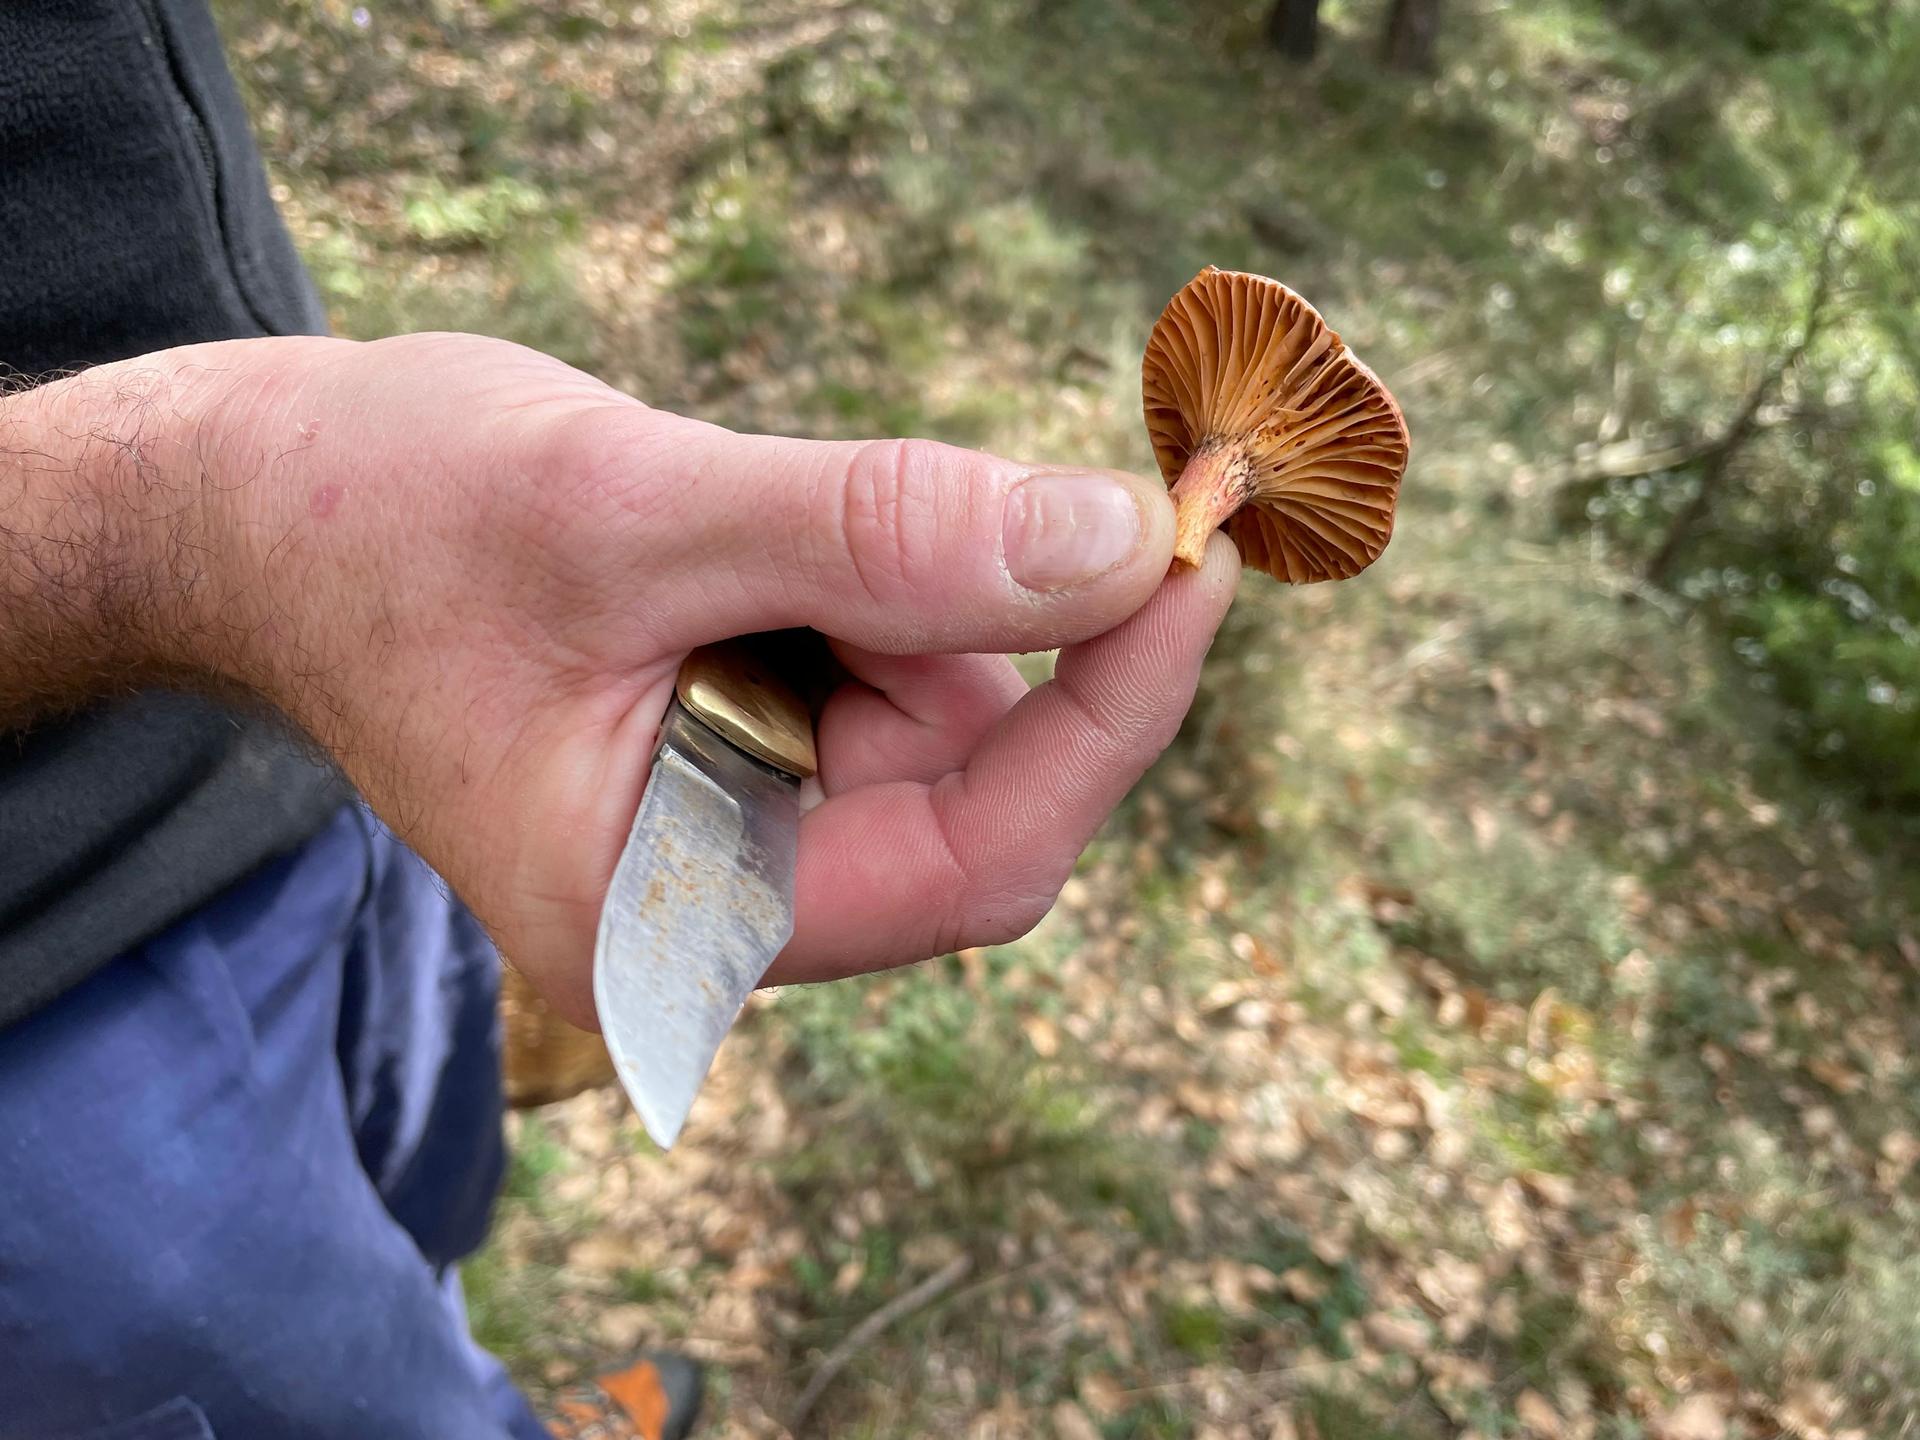 Pep González shows off a freshly cut cama de perdiu mushroom (chroogomphus rutilus), known in English as the brown slimecap or the copper spike. The 49-year-old has been mushroom hunting since he was 12, a trade he learned from his grandmother.